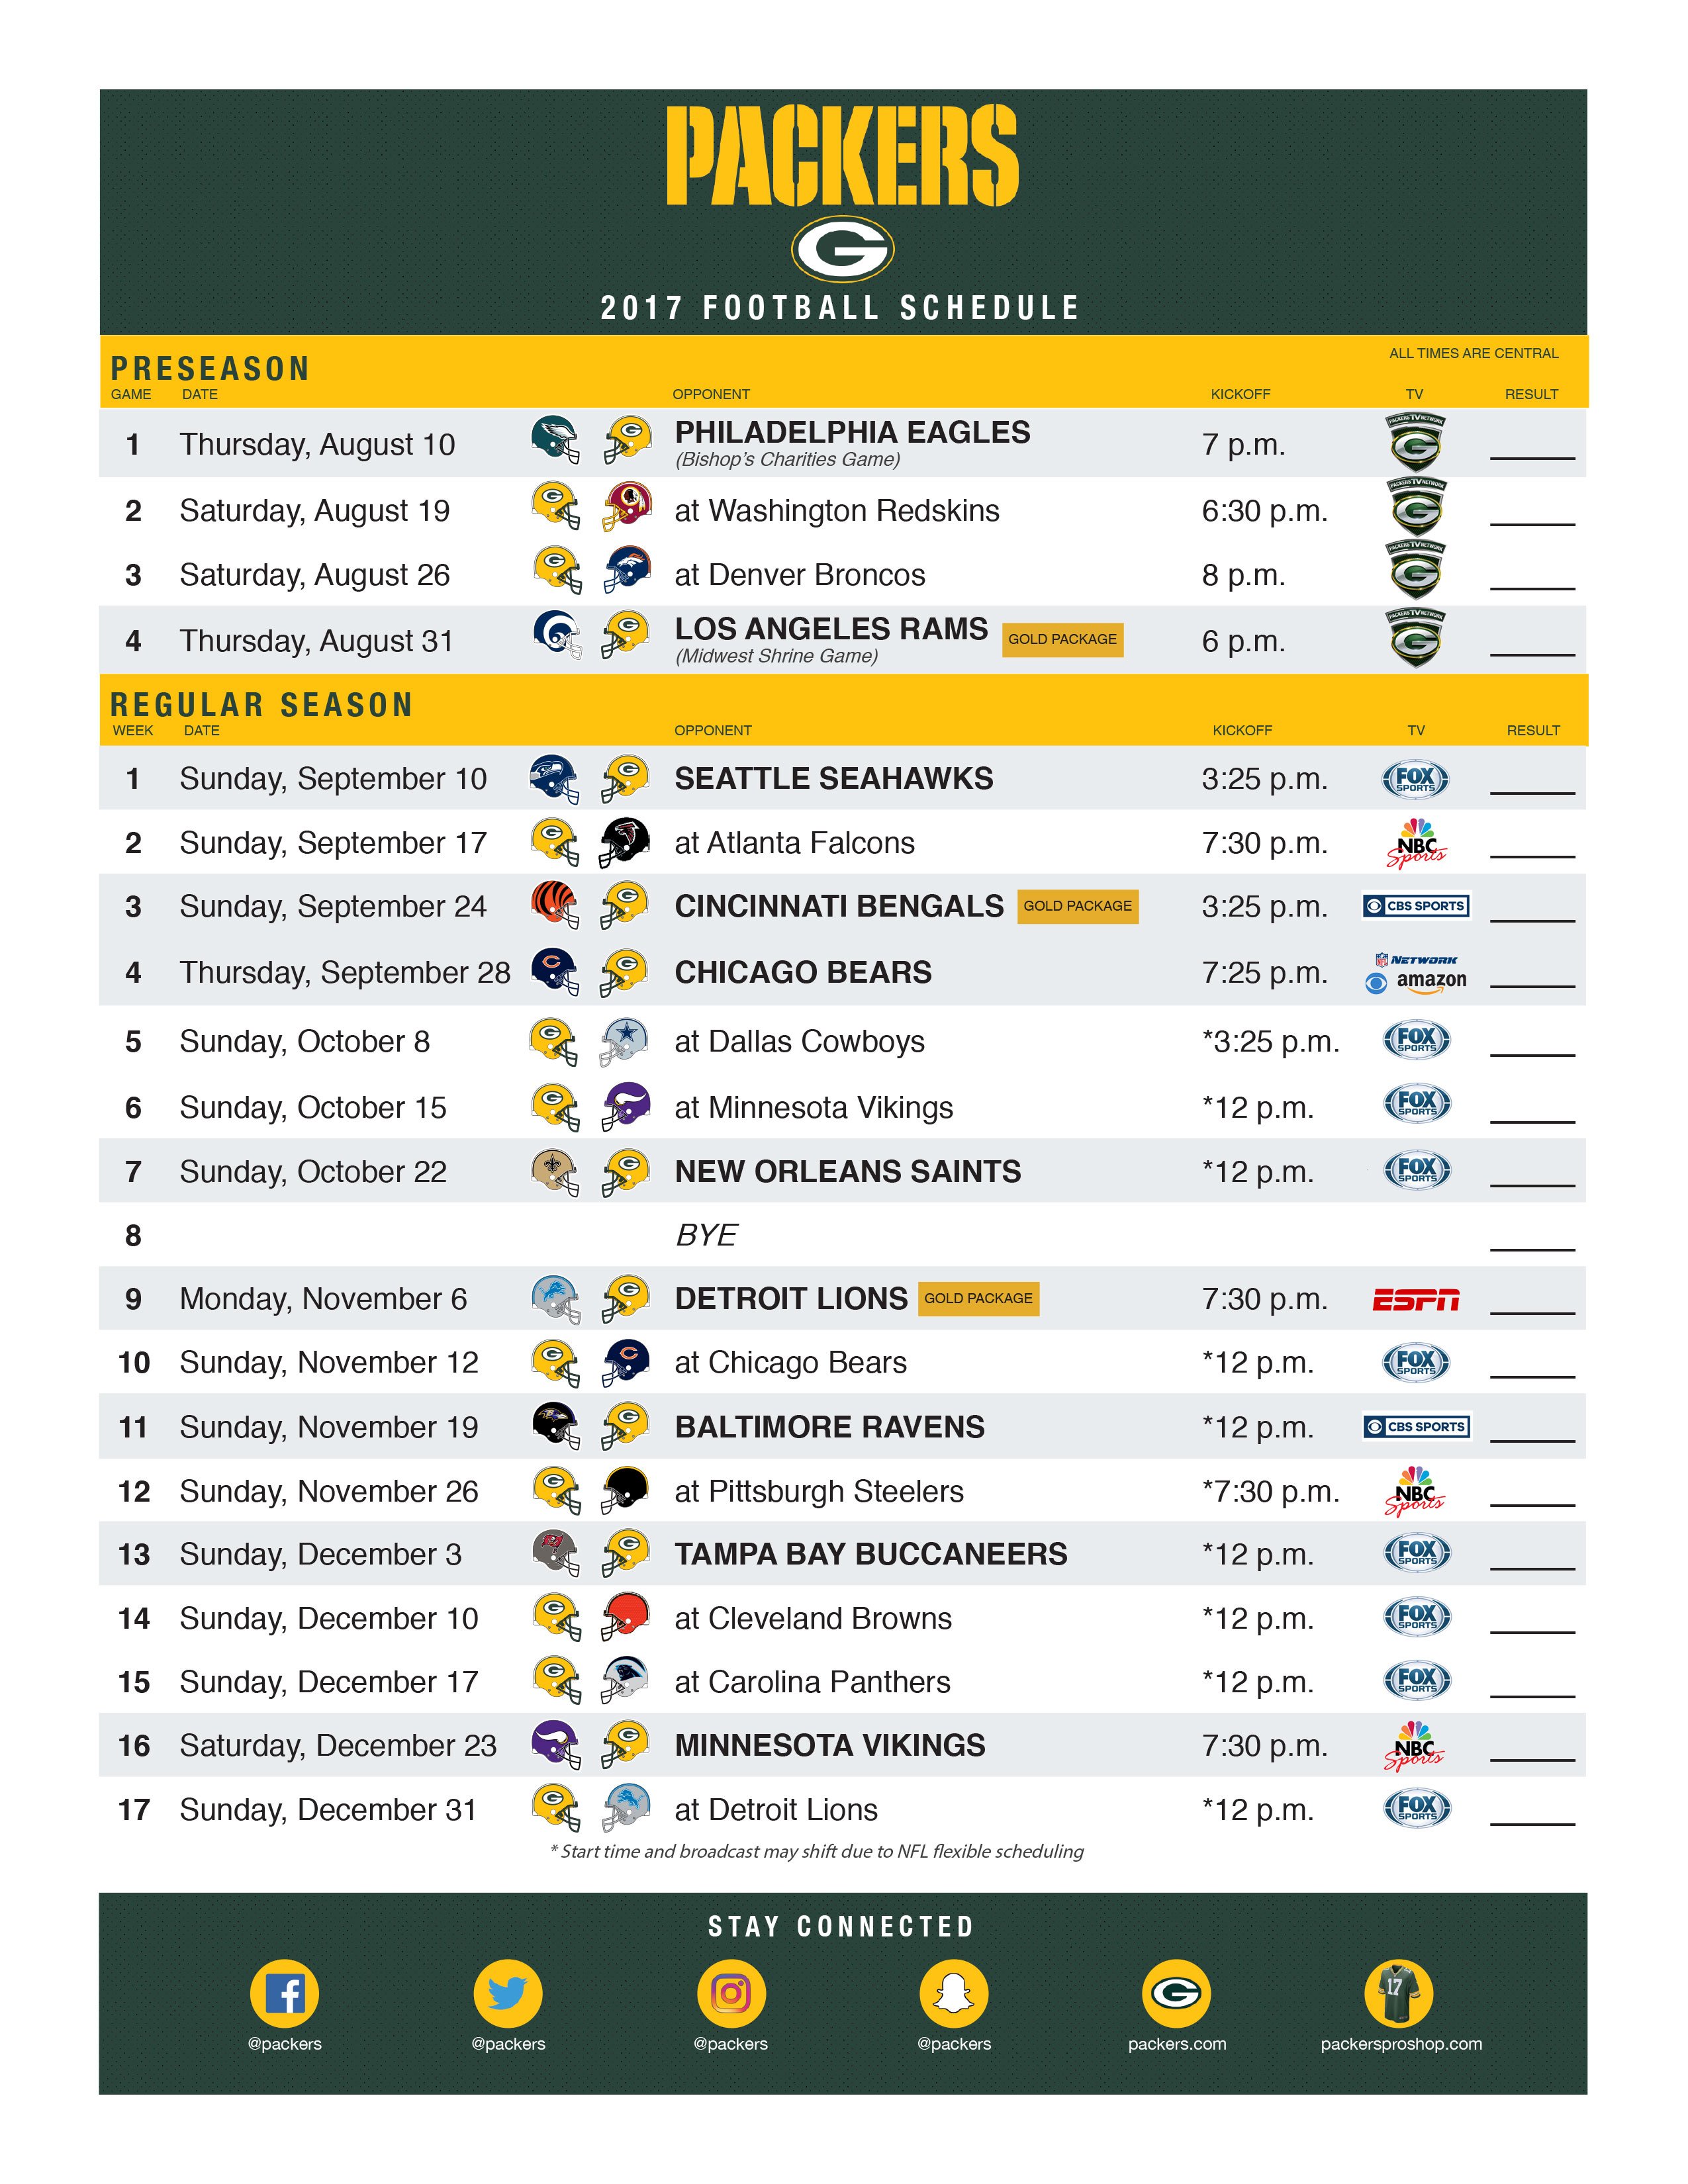 green bay packers schedule today